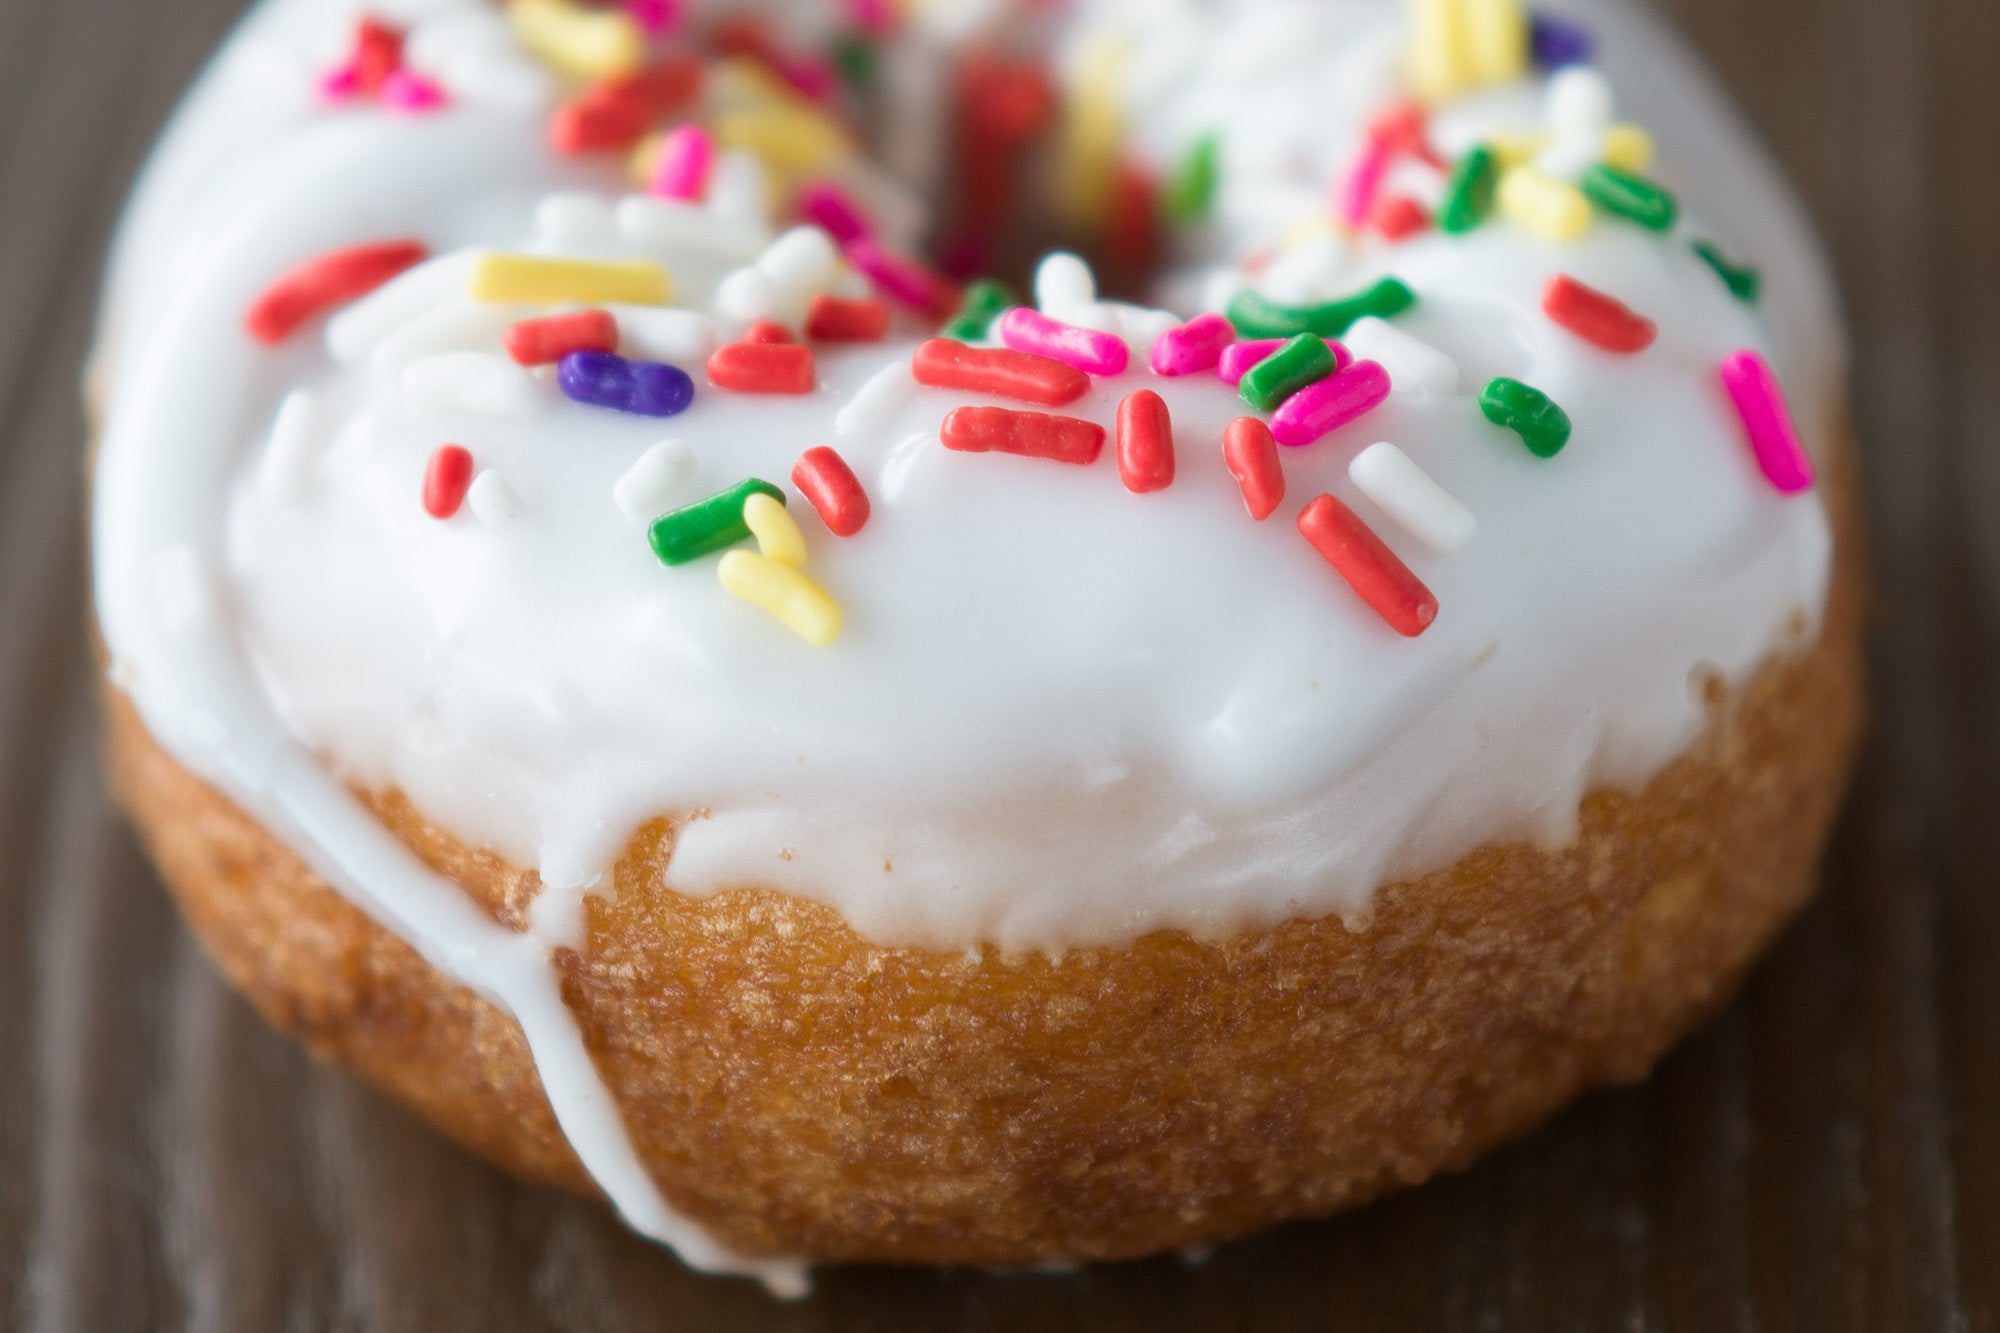 Hasselblad X2D 100C review sample image donut with sprinkles close crop